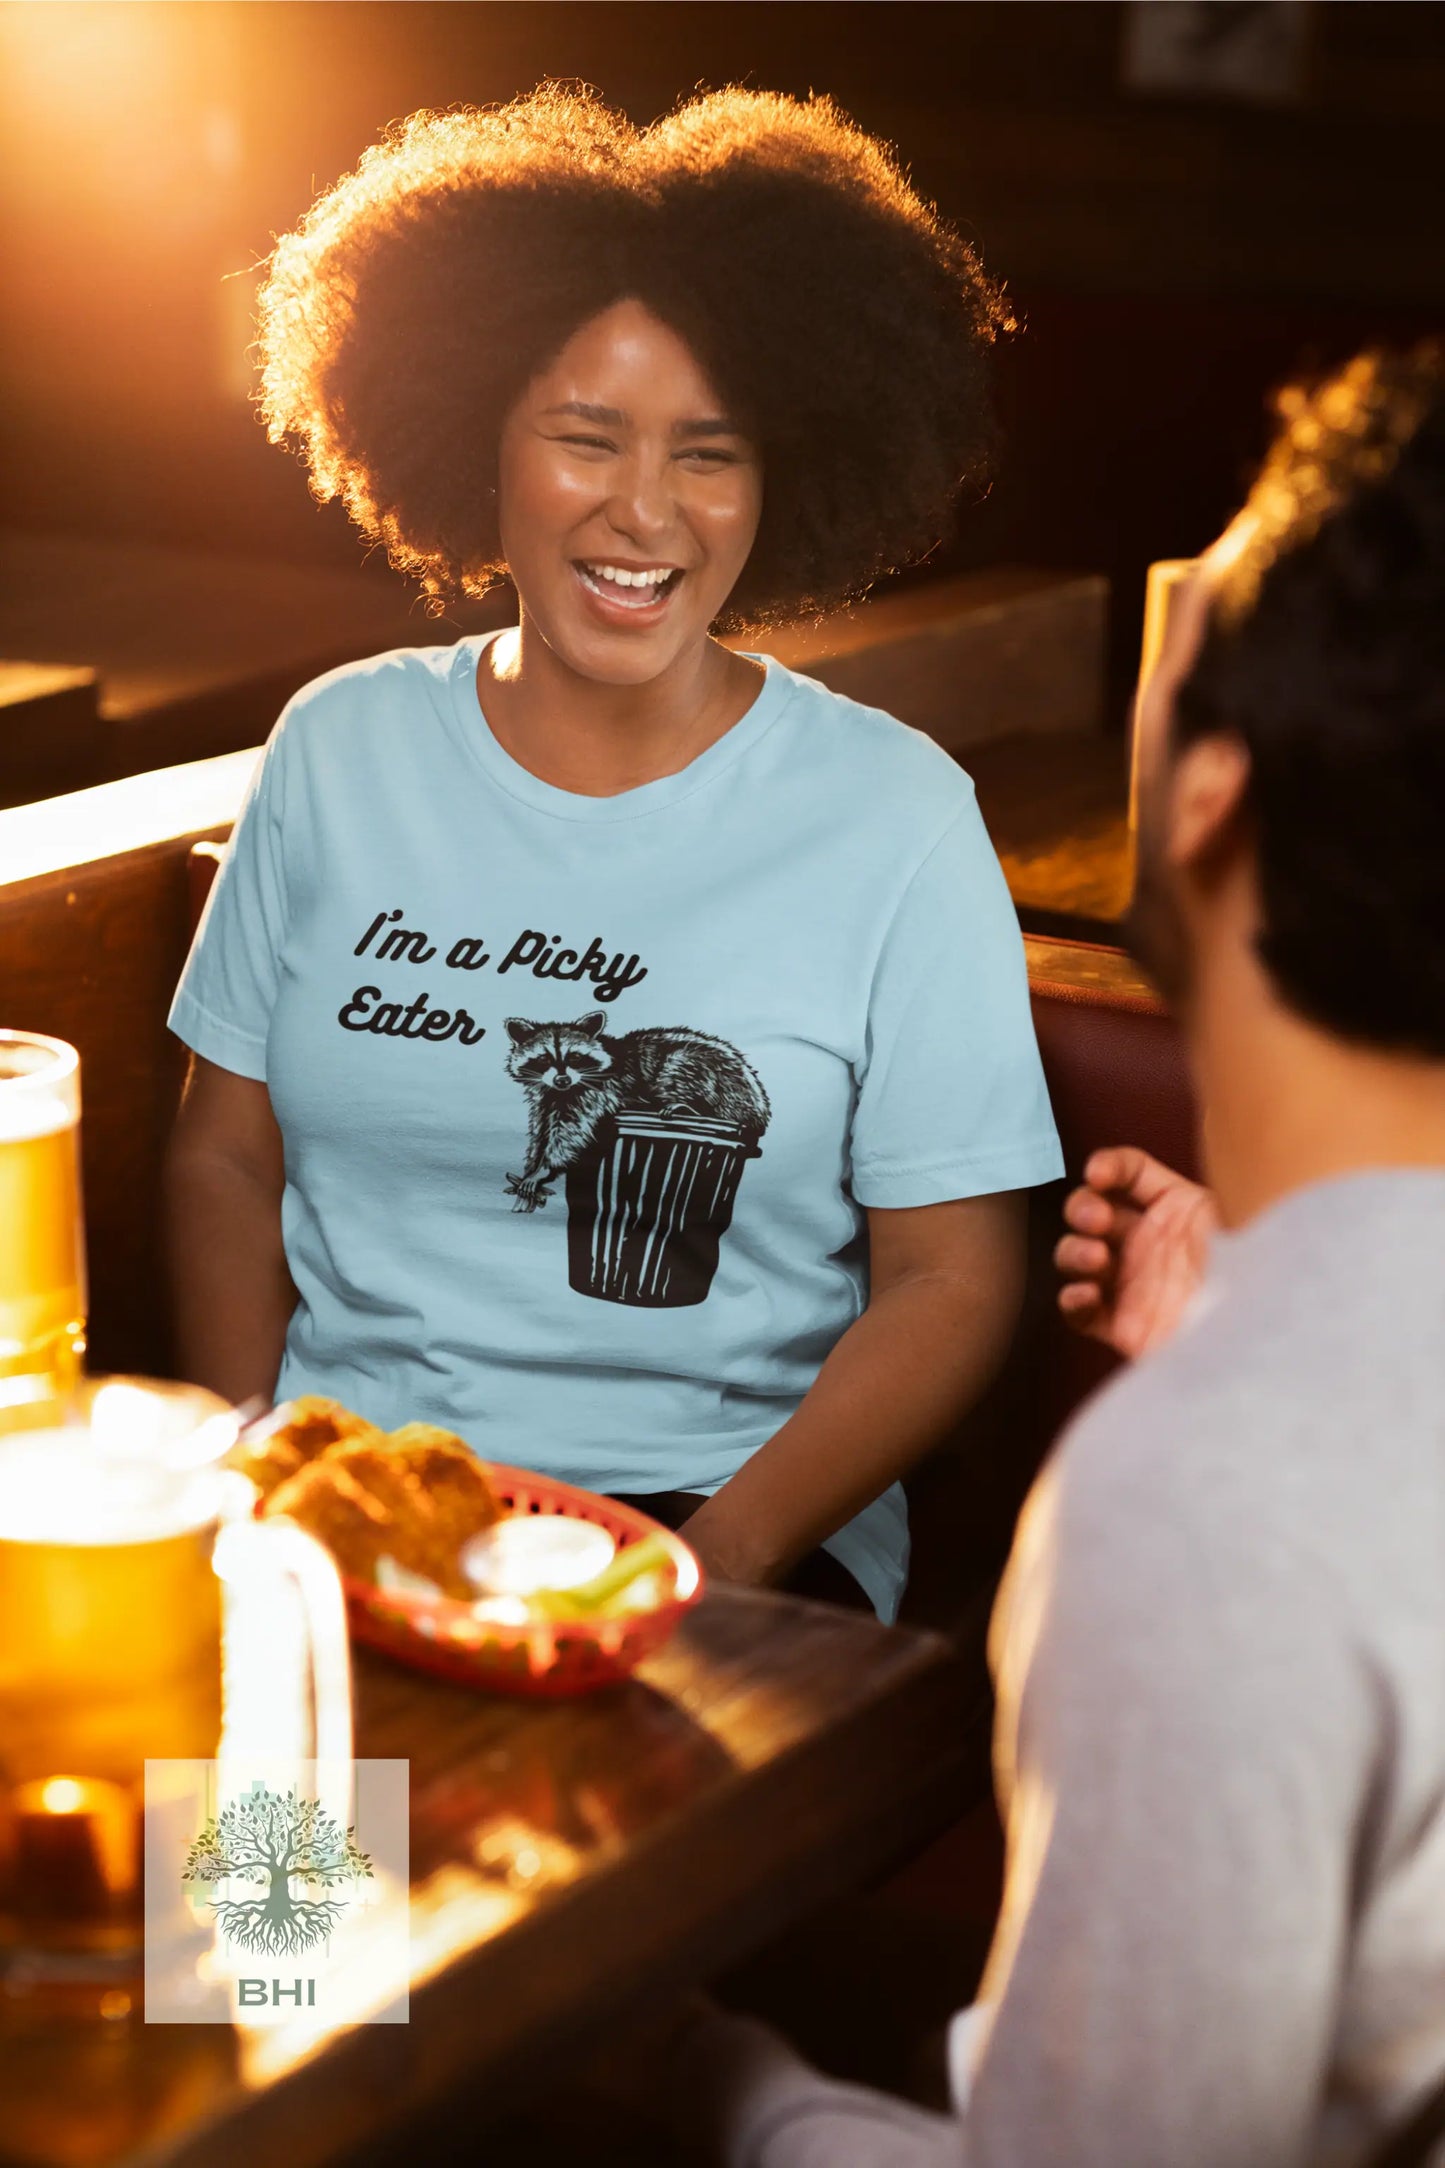 I'm a Picky Eater - Foodie Raccoon Graphic Tee Light Colors